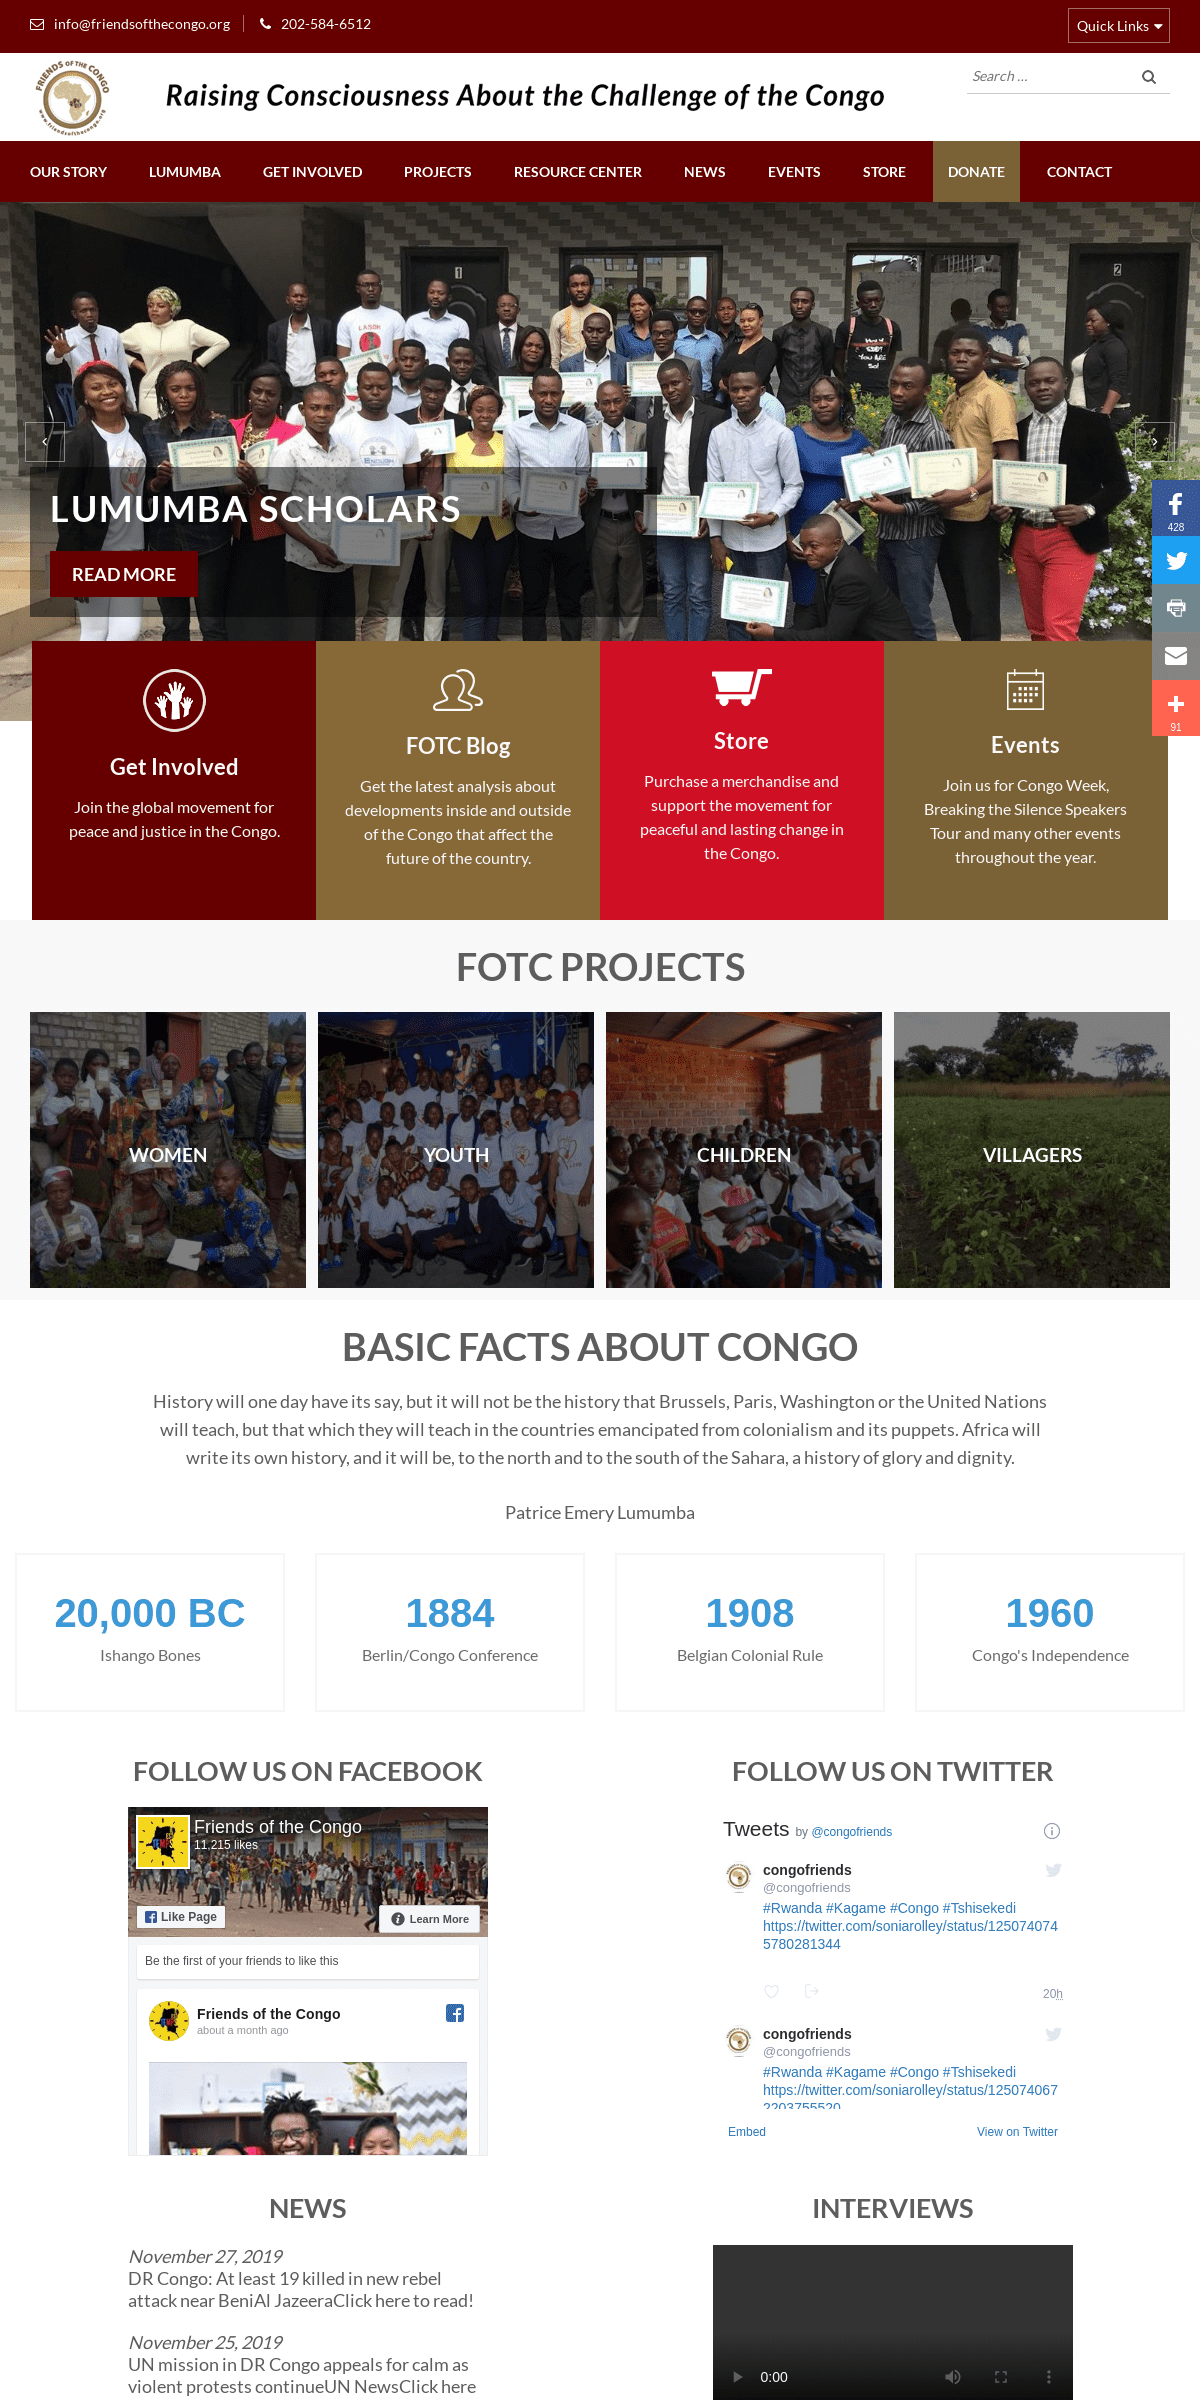 A complete backup of friendsofthecongo.org